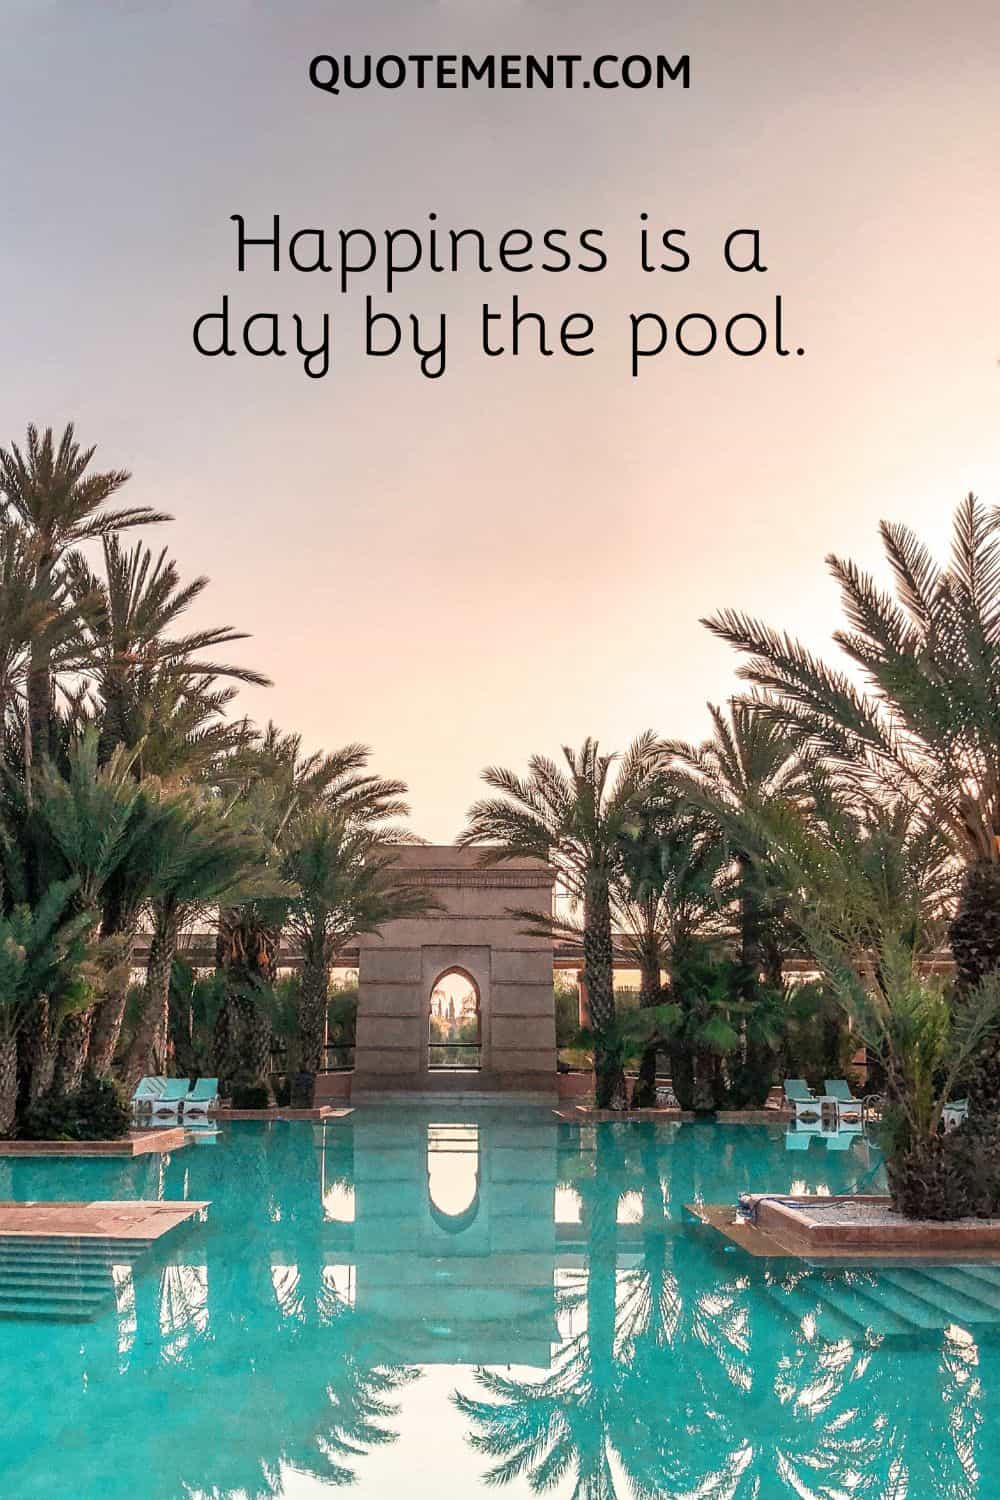 Happiness is a day by the pool.